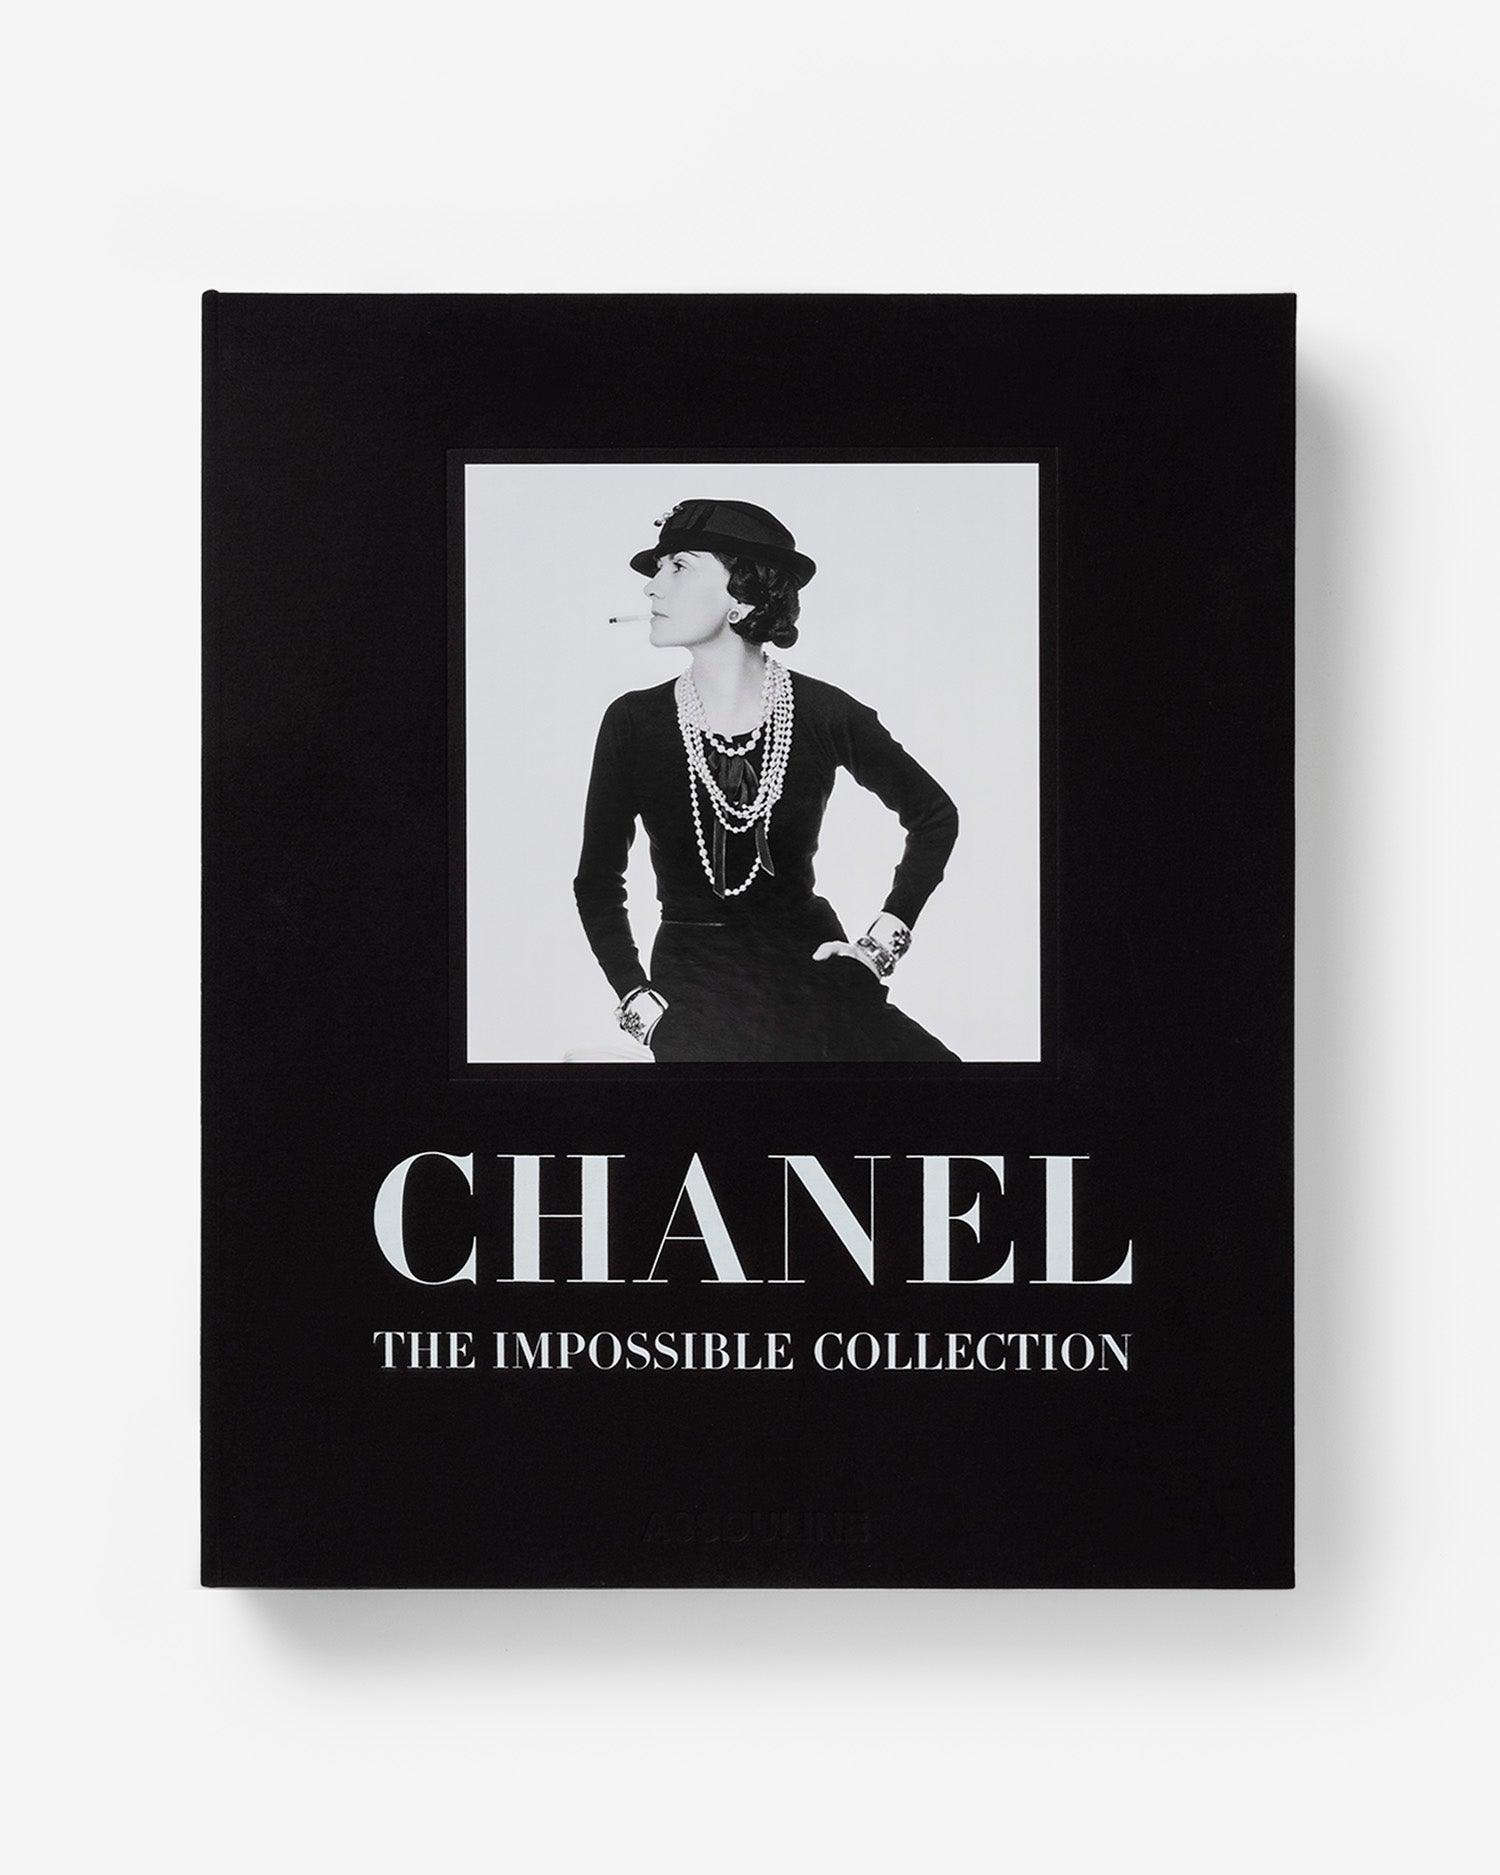 CHANEL: THE IMPOSSIBLE COLLECTION